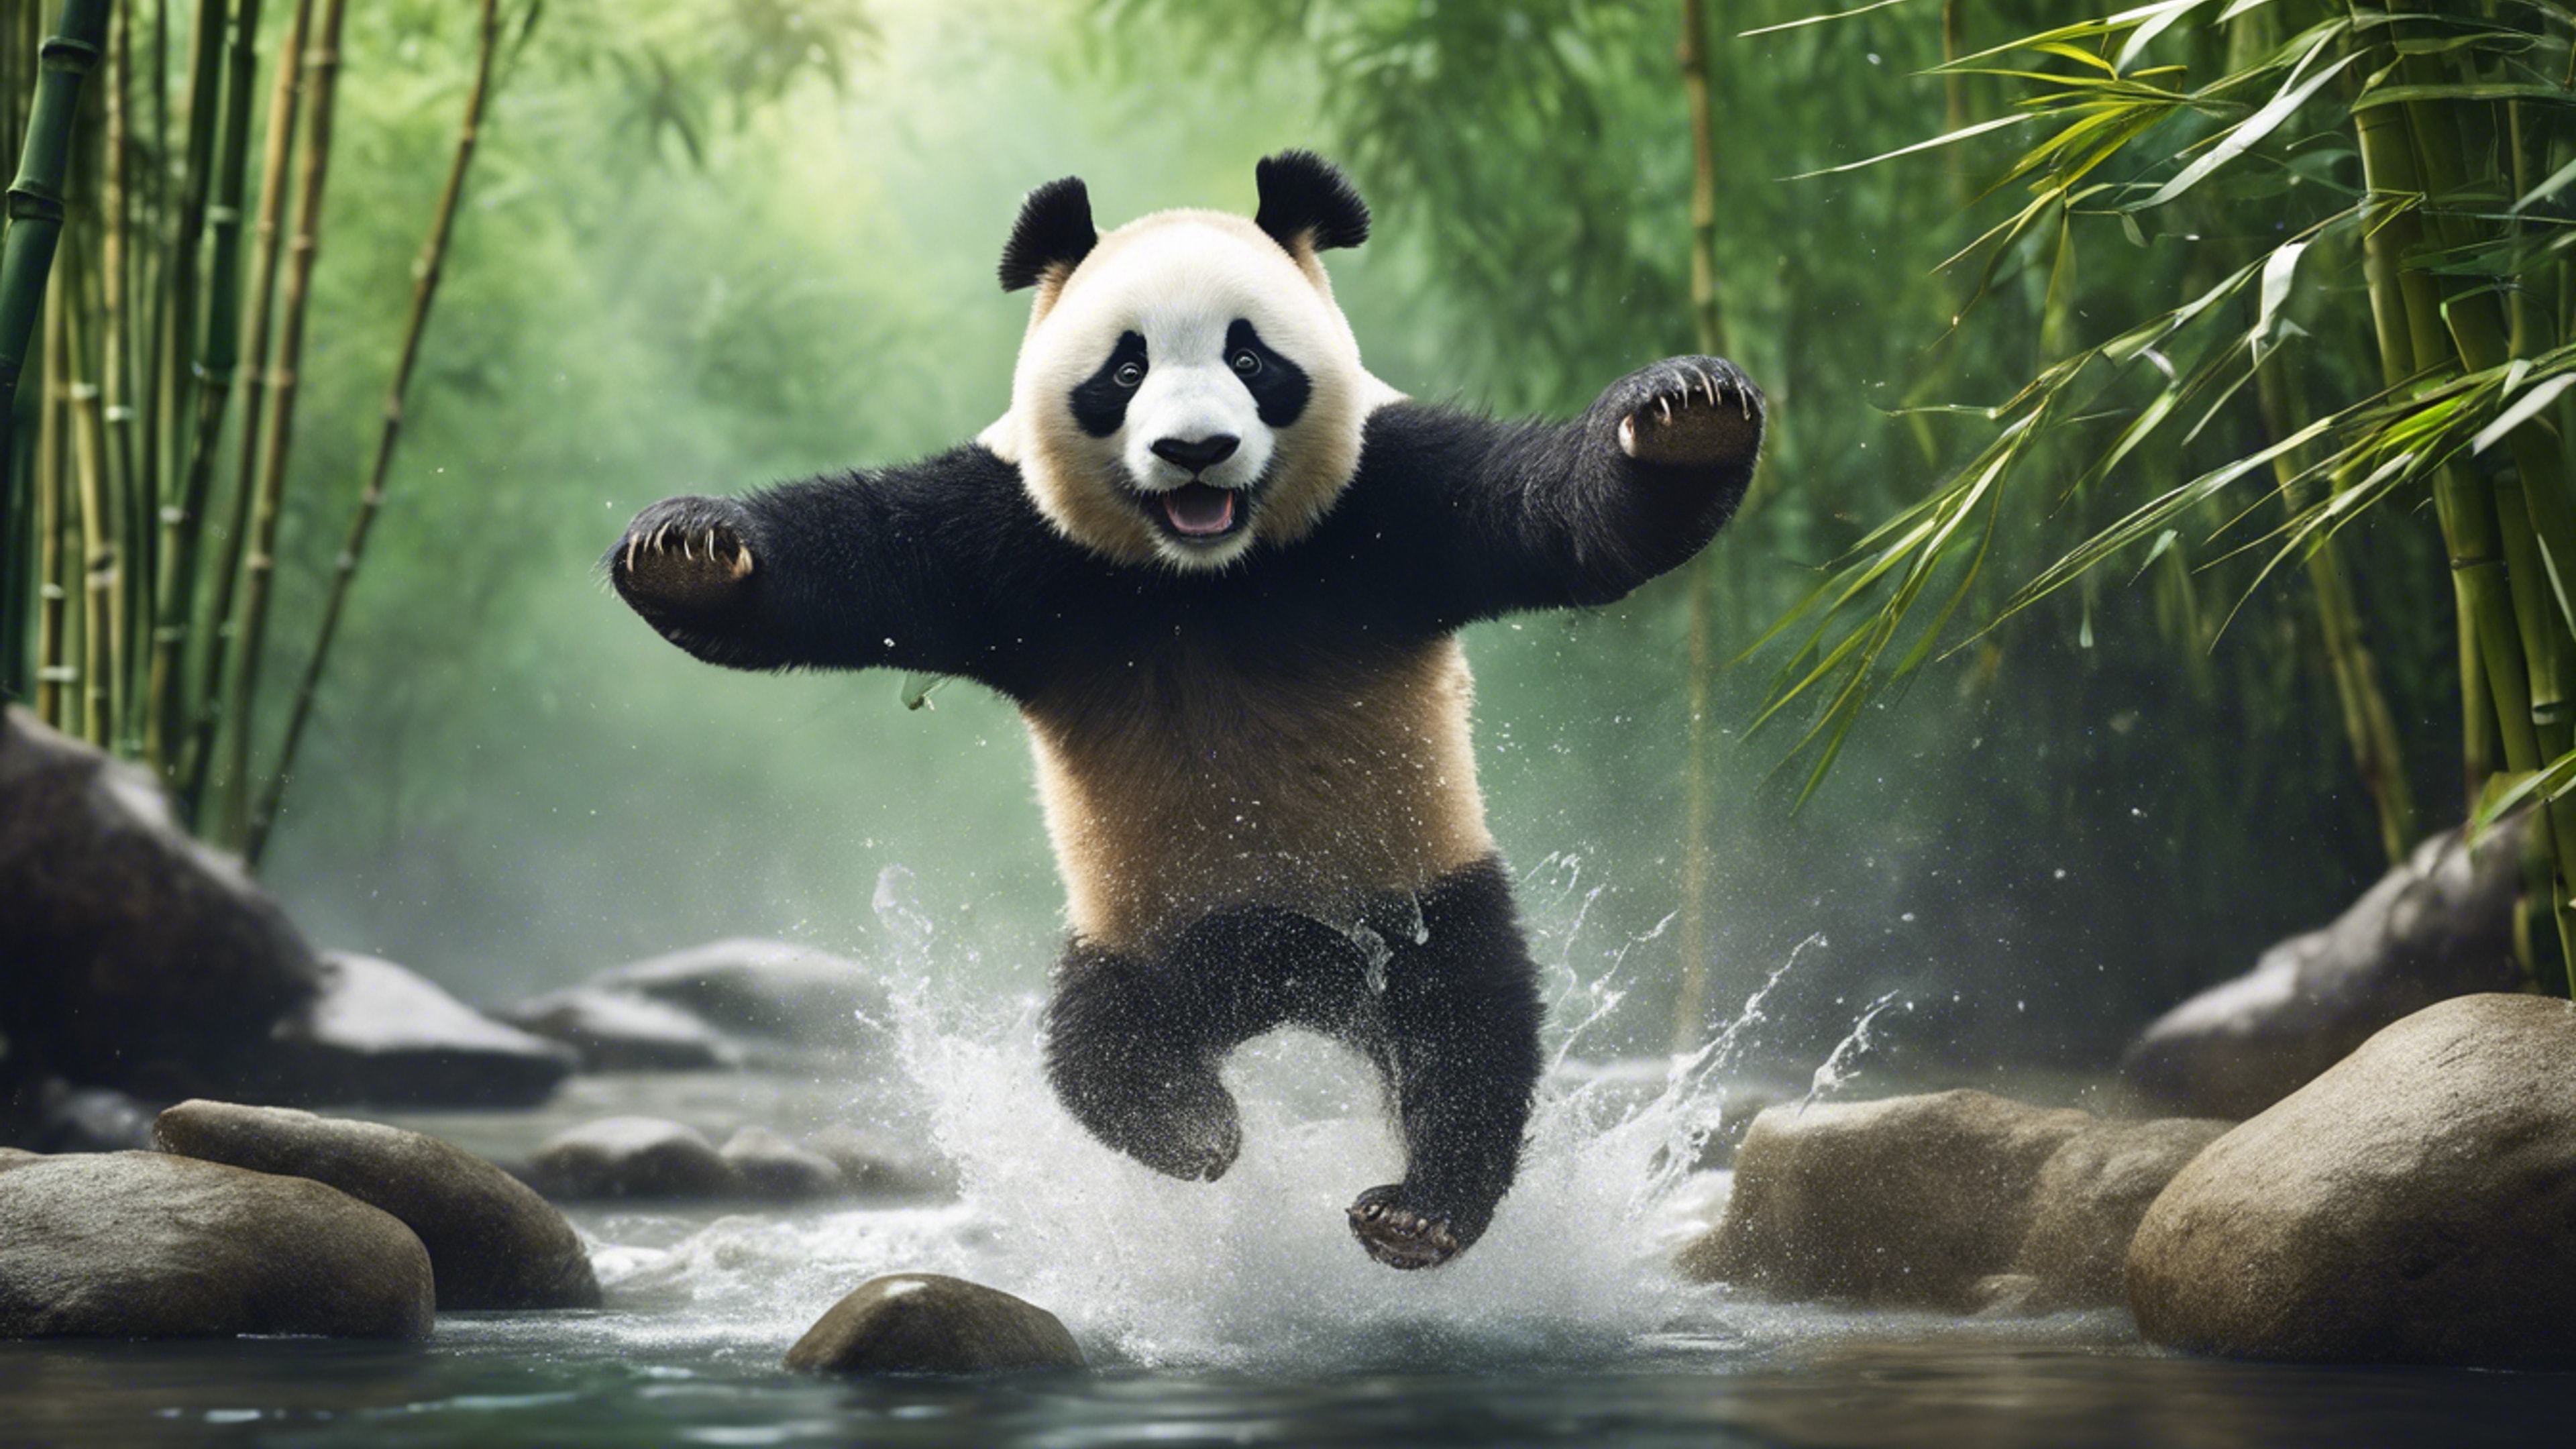 An adventurous panda leaping across a rapid creek with bamboo forests in the backdrop. Тапет[317eaaa1af264f04a7c3]